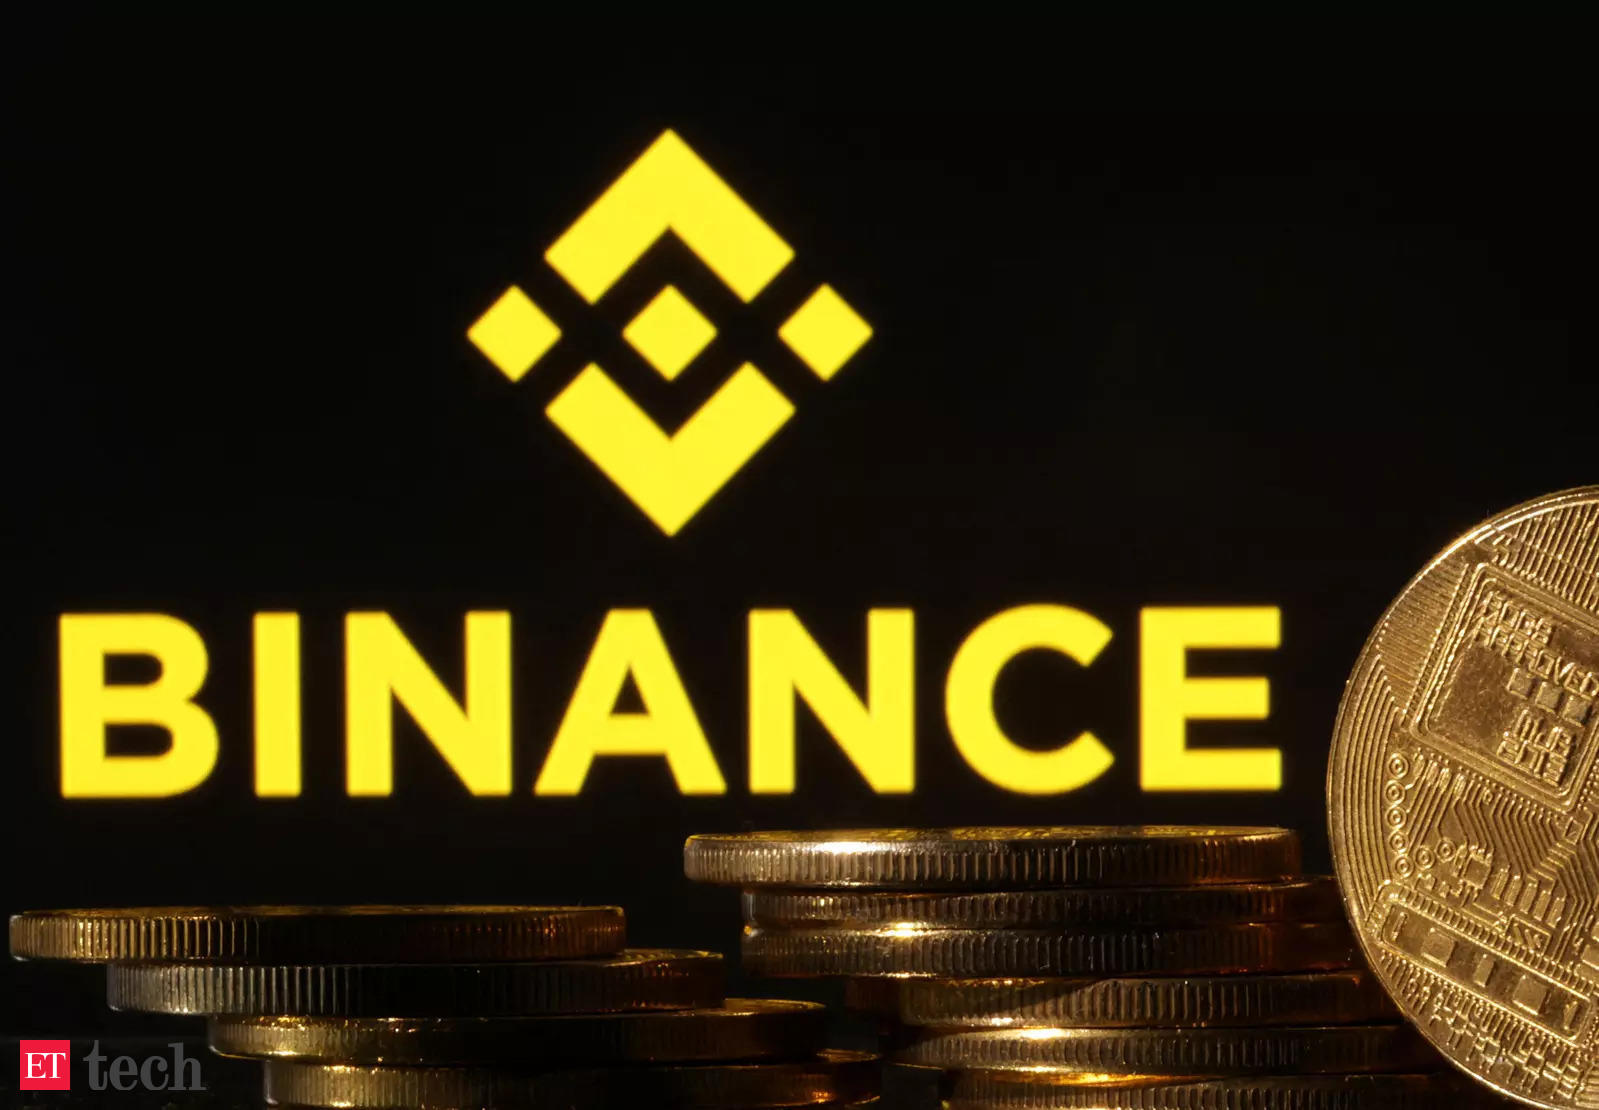 binance deposit: Crypto firm Binance says deposits returning after heavy  withdrawals - 